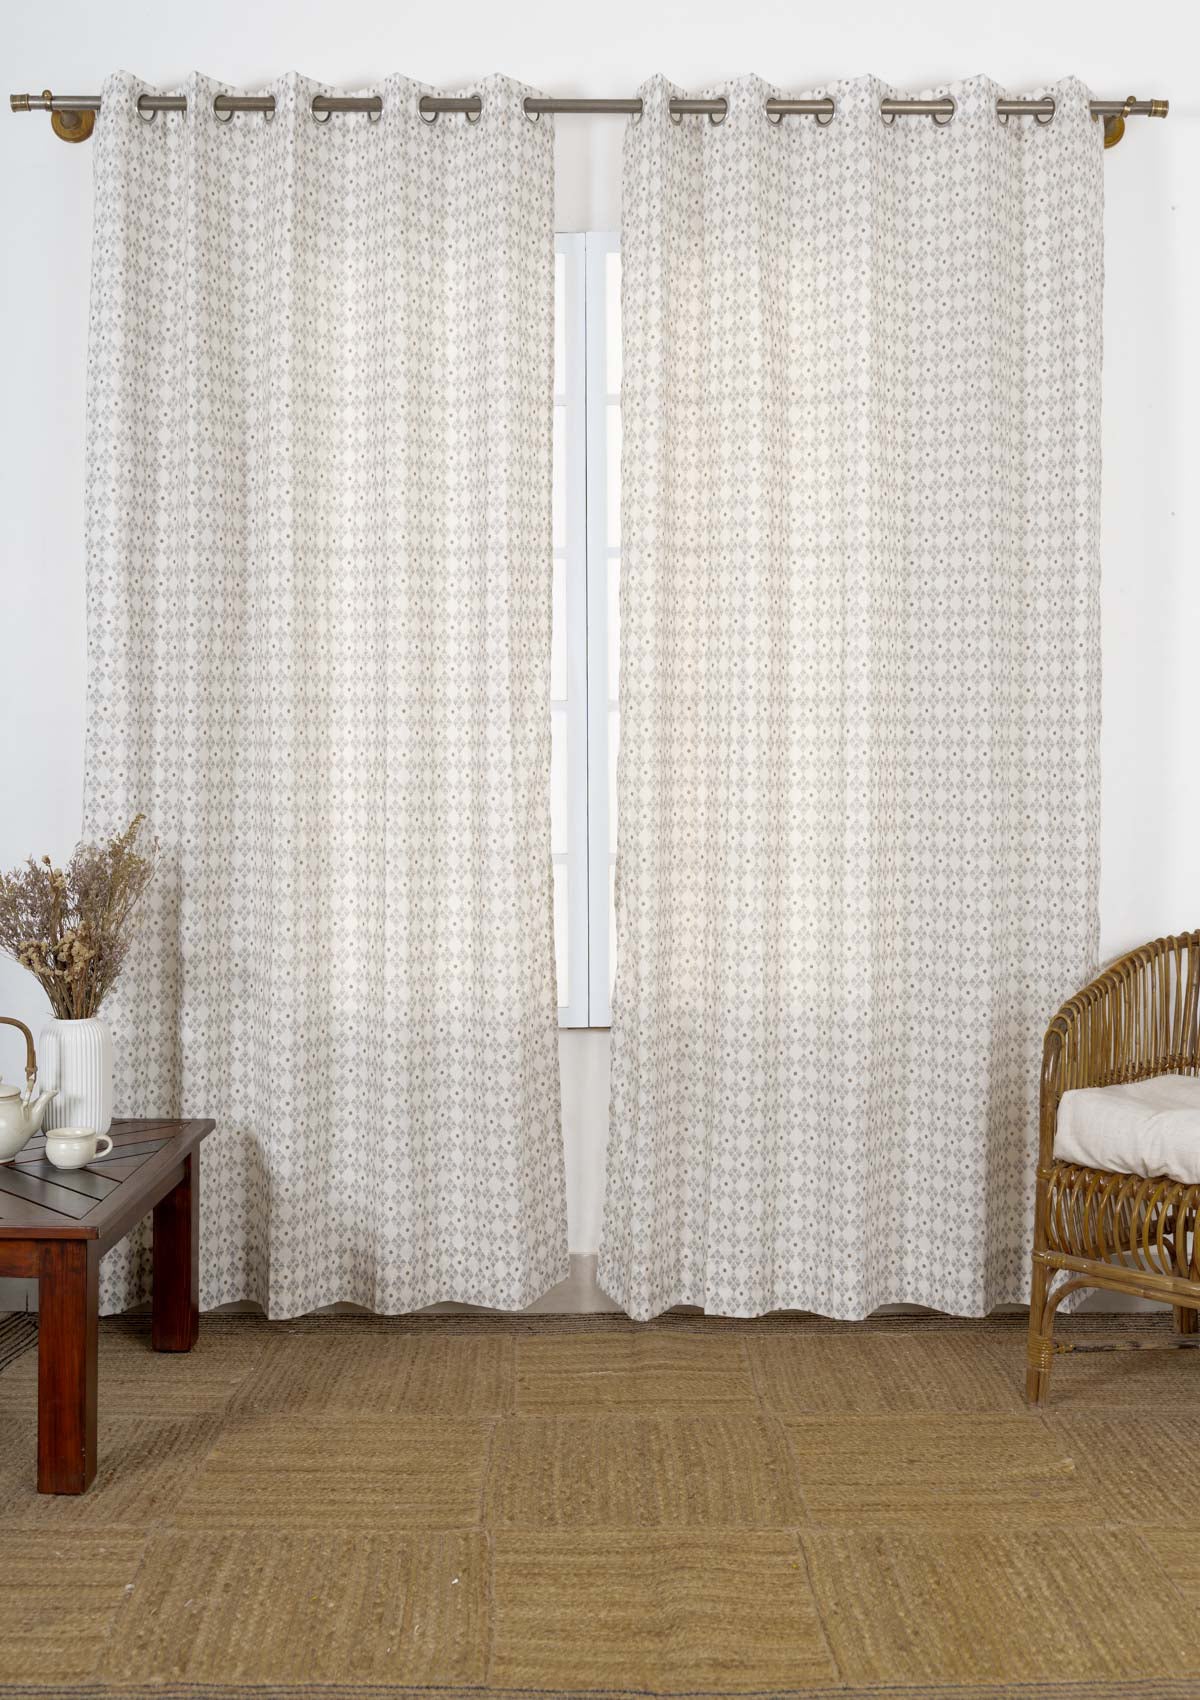 Mirage 100% cotton geometric sheer curtain for living room - Light filtering - Grey - Single